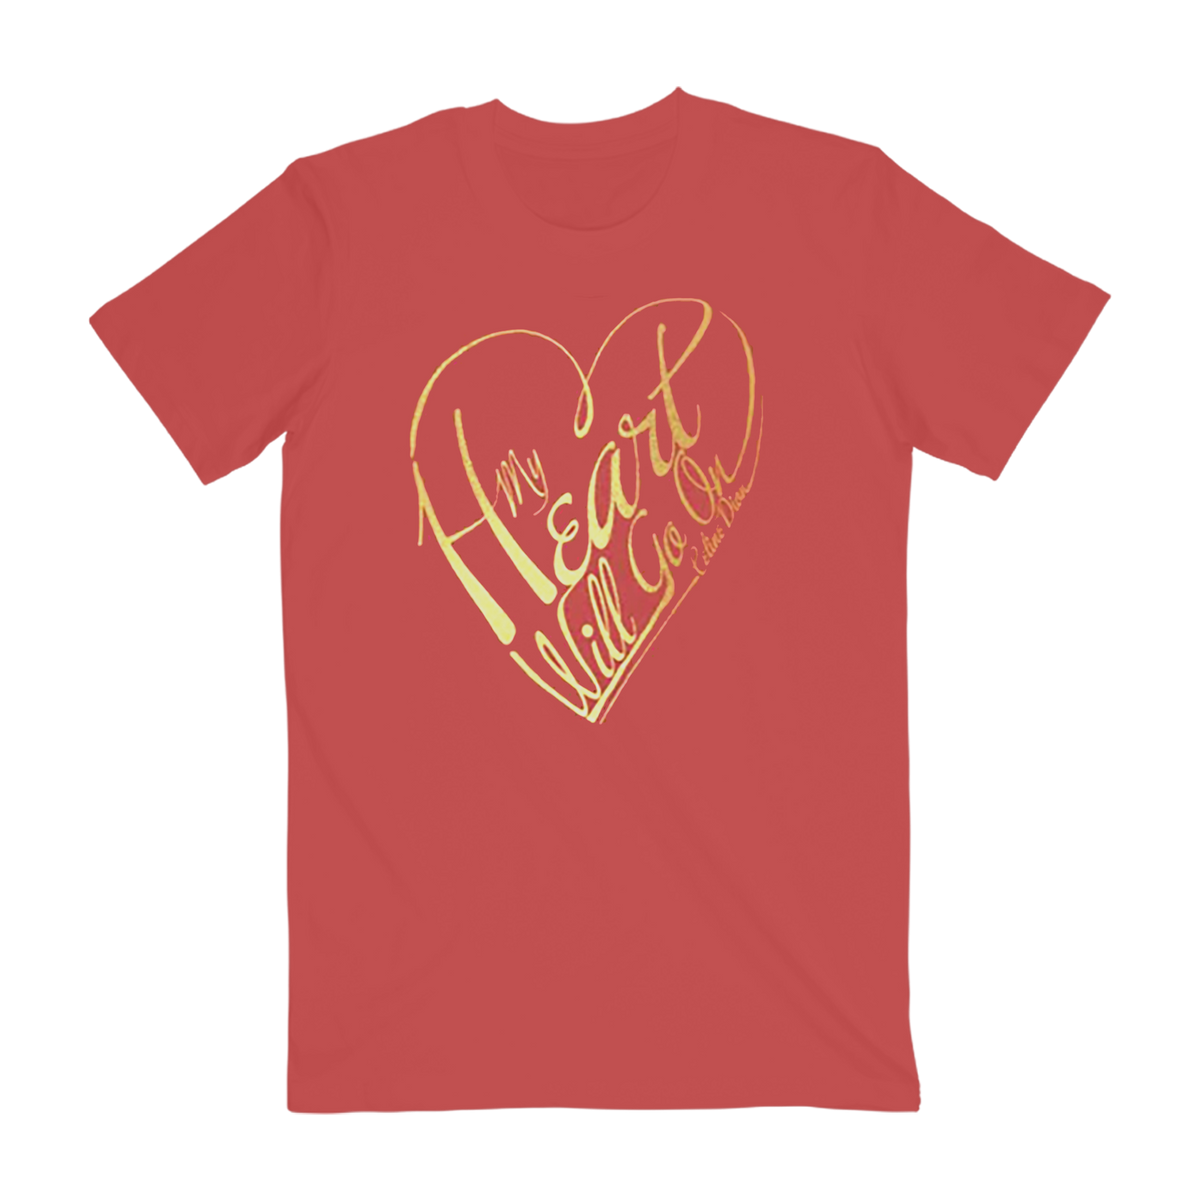 My Heart Will Go On T-Shirt with gold foil heart design 